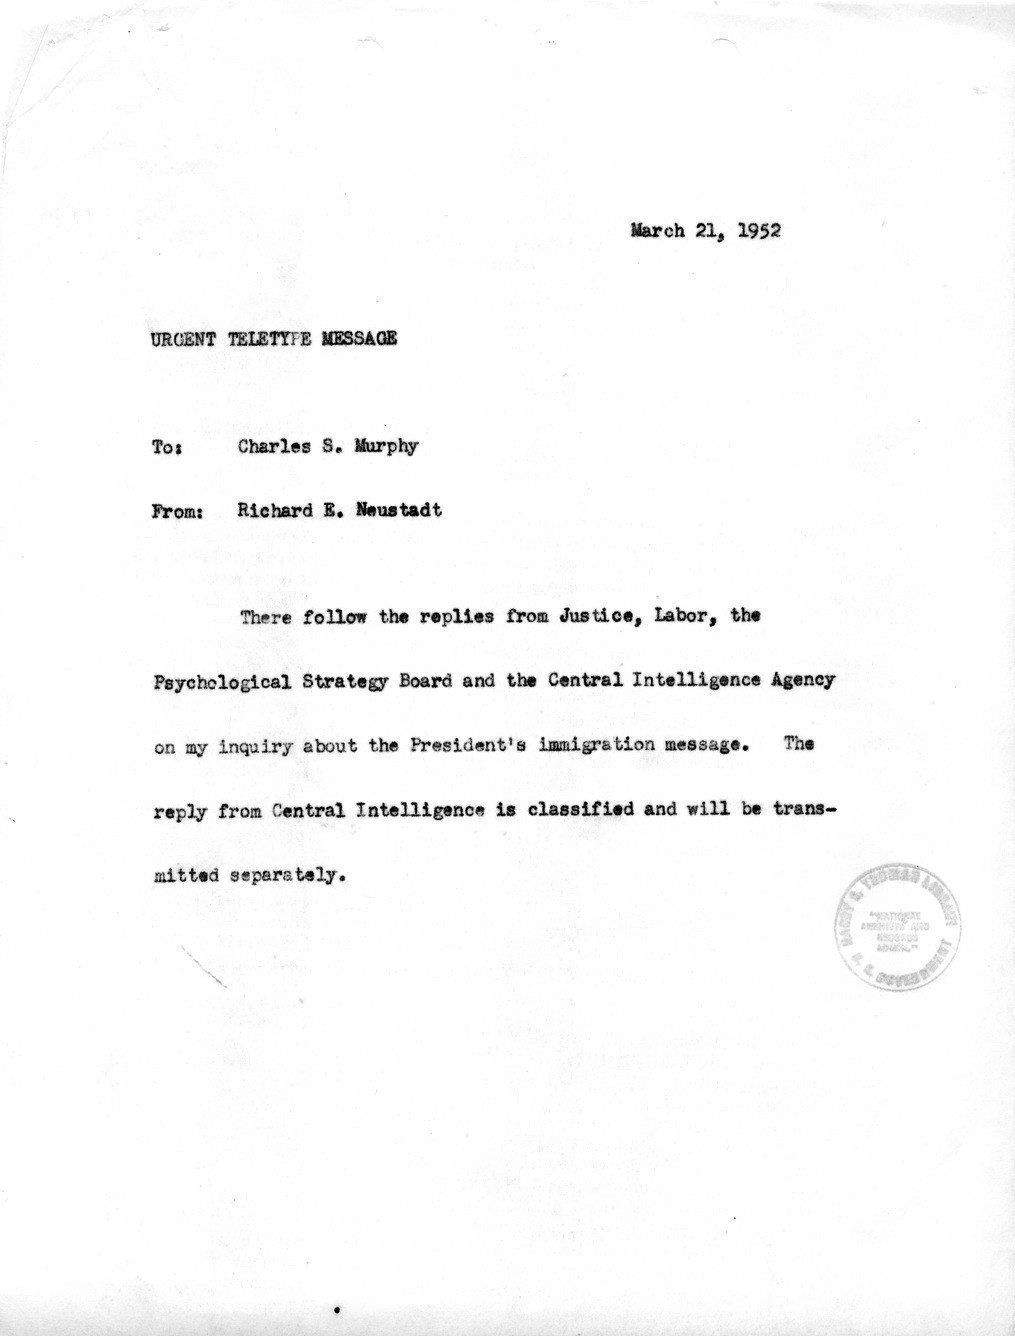 Note from Richard Neustadt to Julius Edelstein With Attached Message Draft